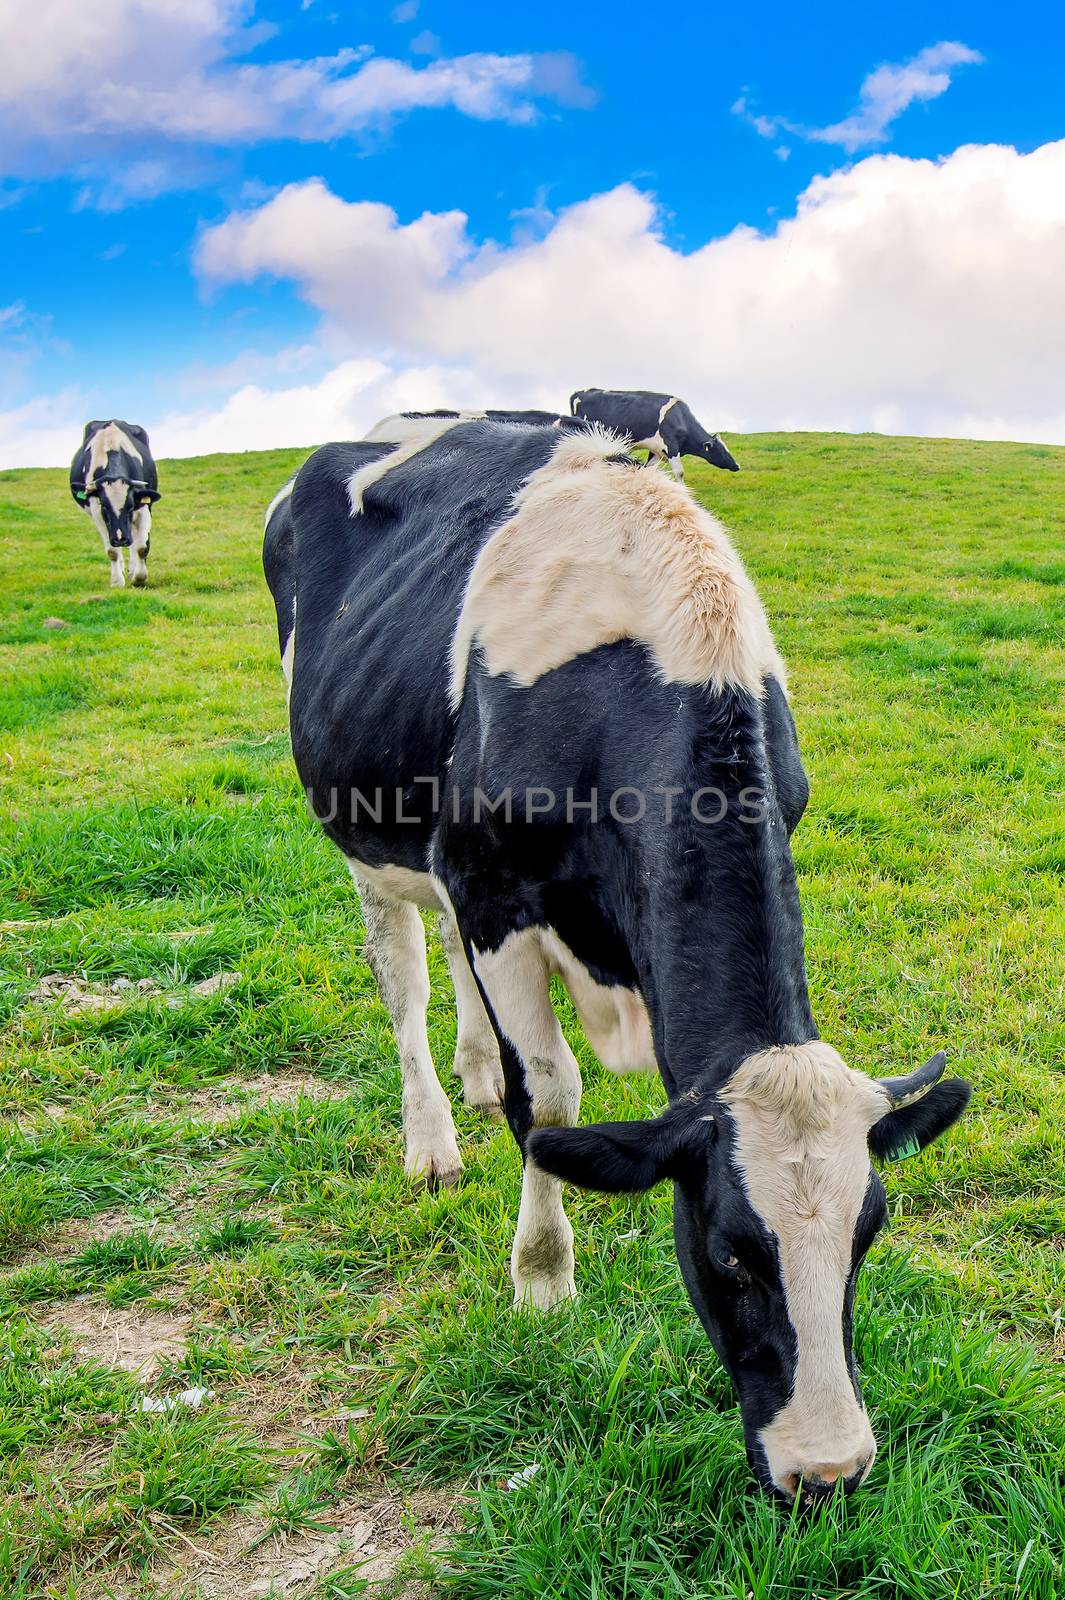 Cows on a green field. by gutarphotoghaphy